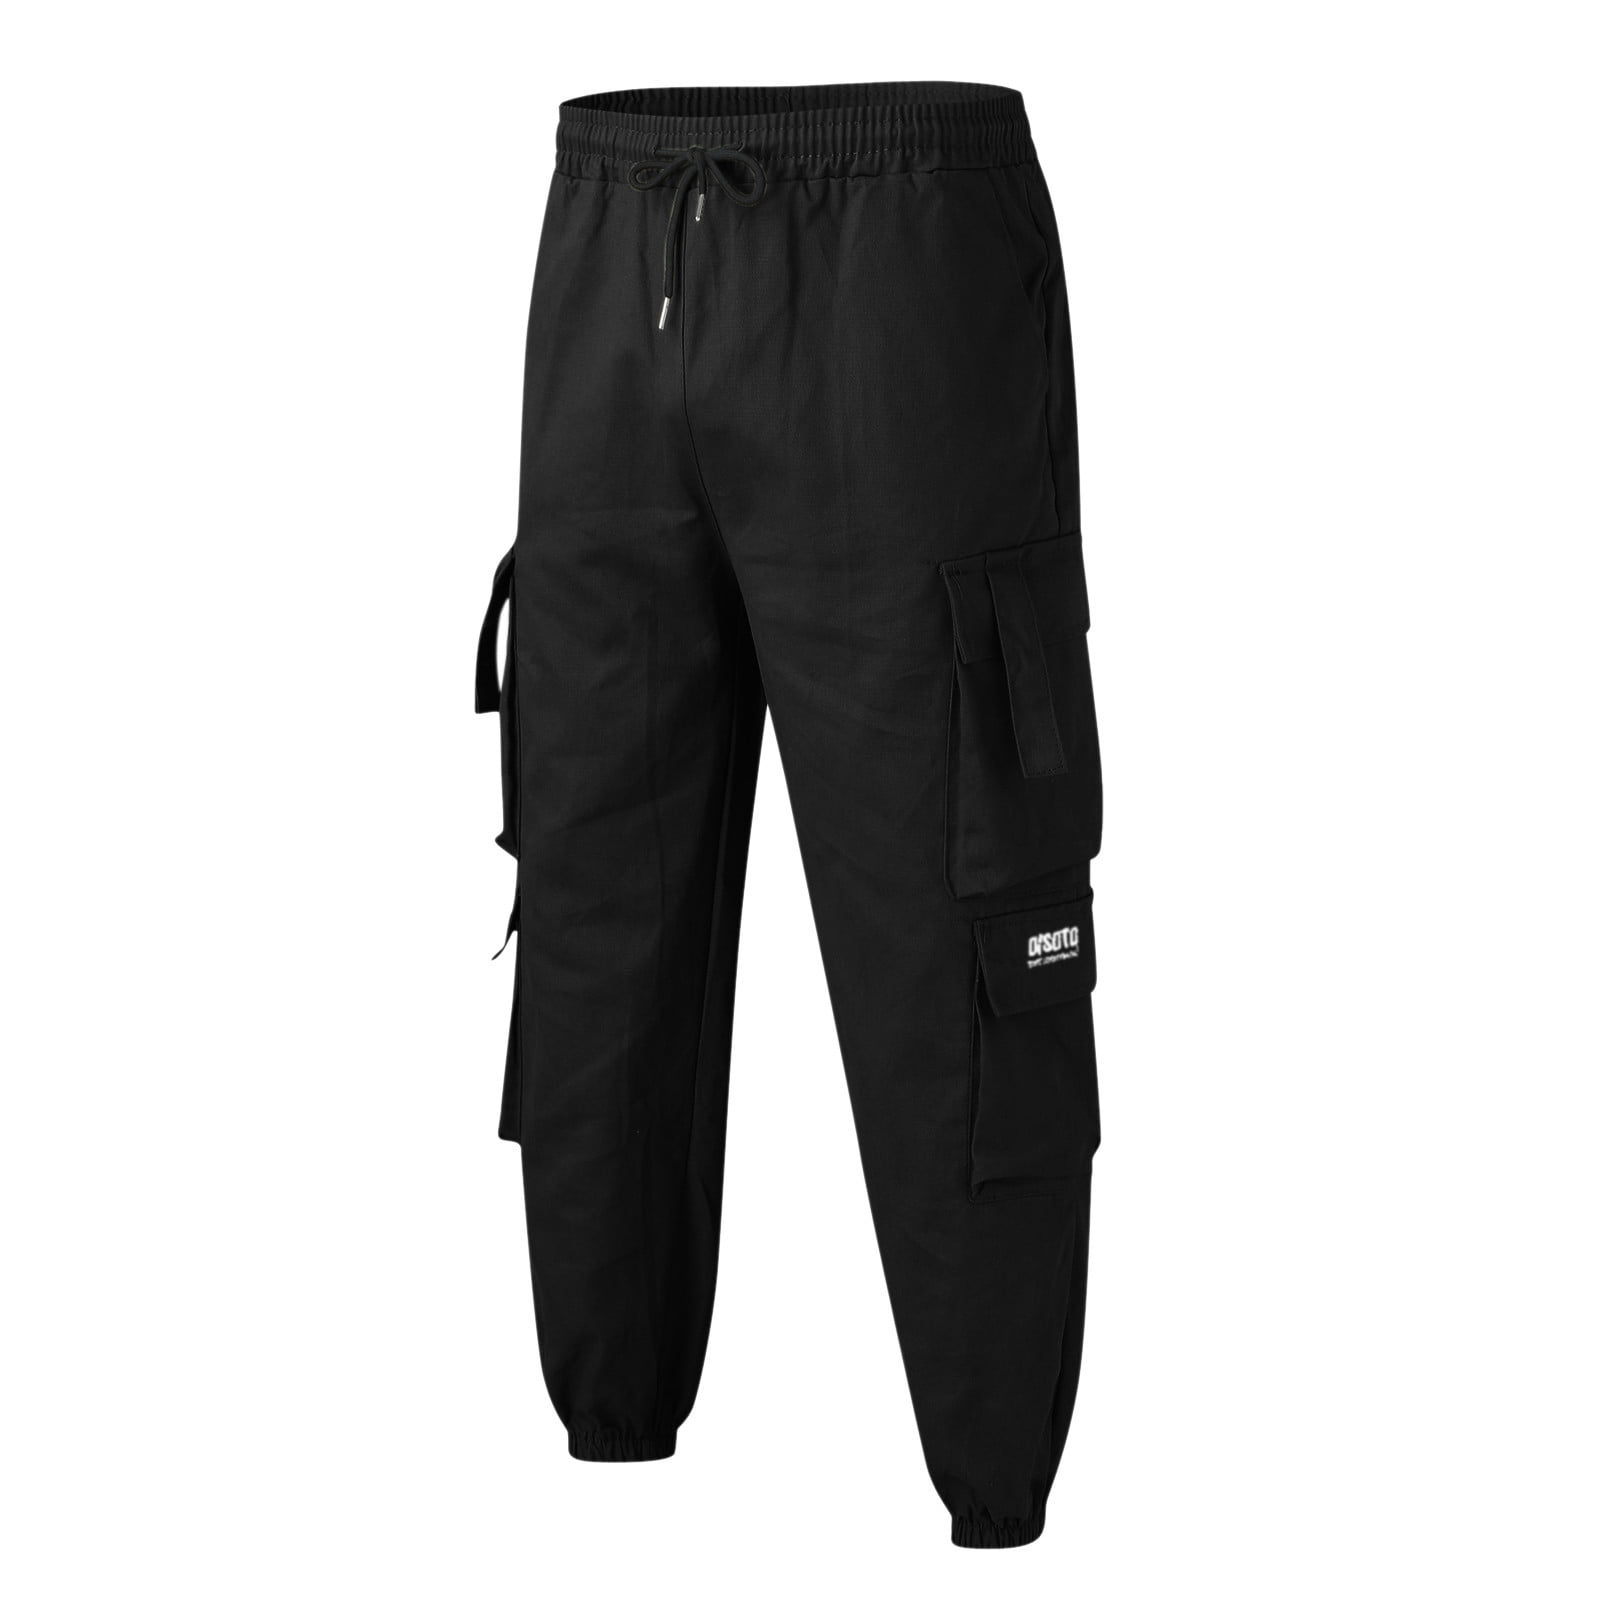  BIFUTON Black Cargo Pants Men Mens 3 Pack Fleece Active  Athletic Workout Jogger Sweatpants for Men with Zipper Pocket and  Drawstring A008 : Clothing, Shoes & Jewelry